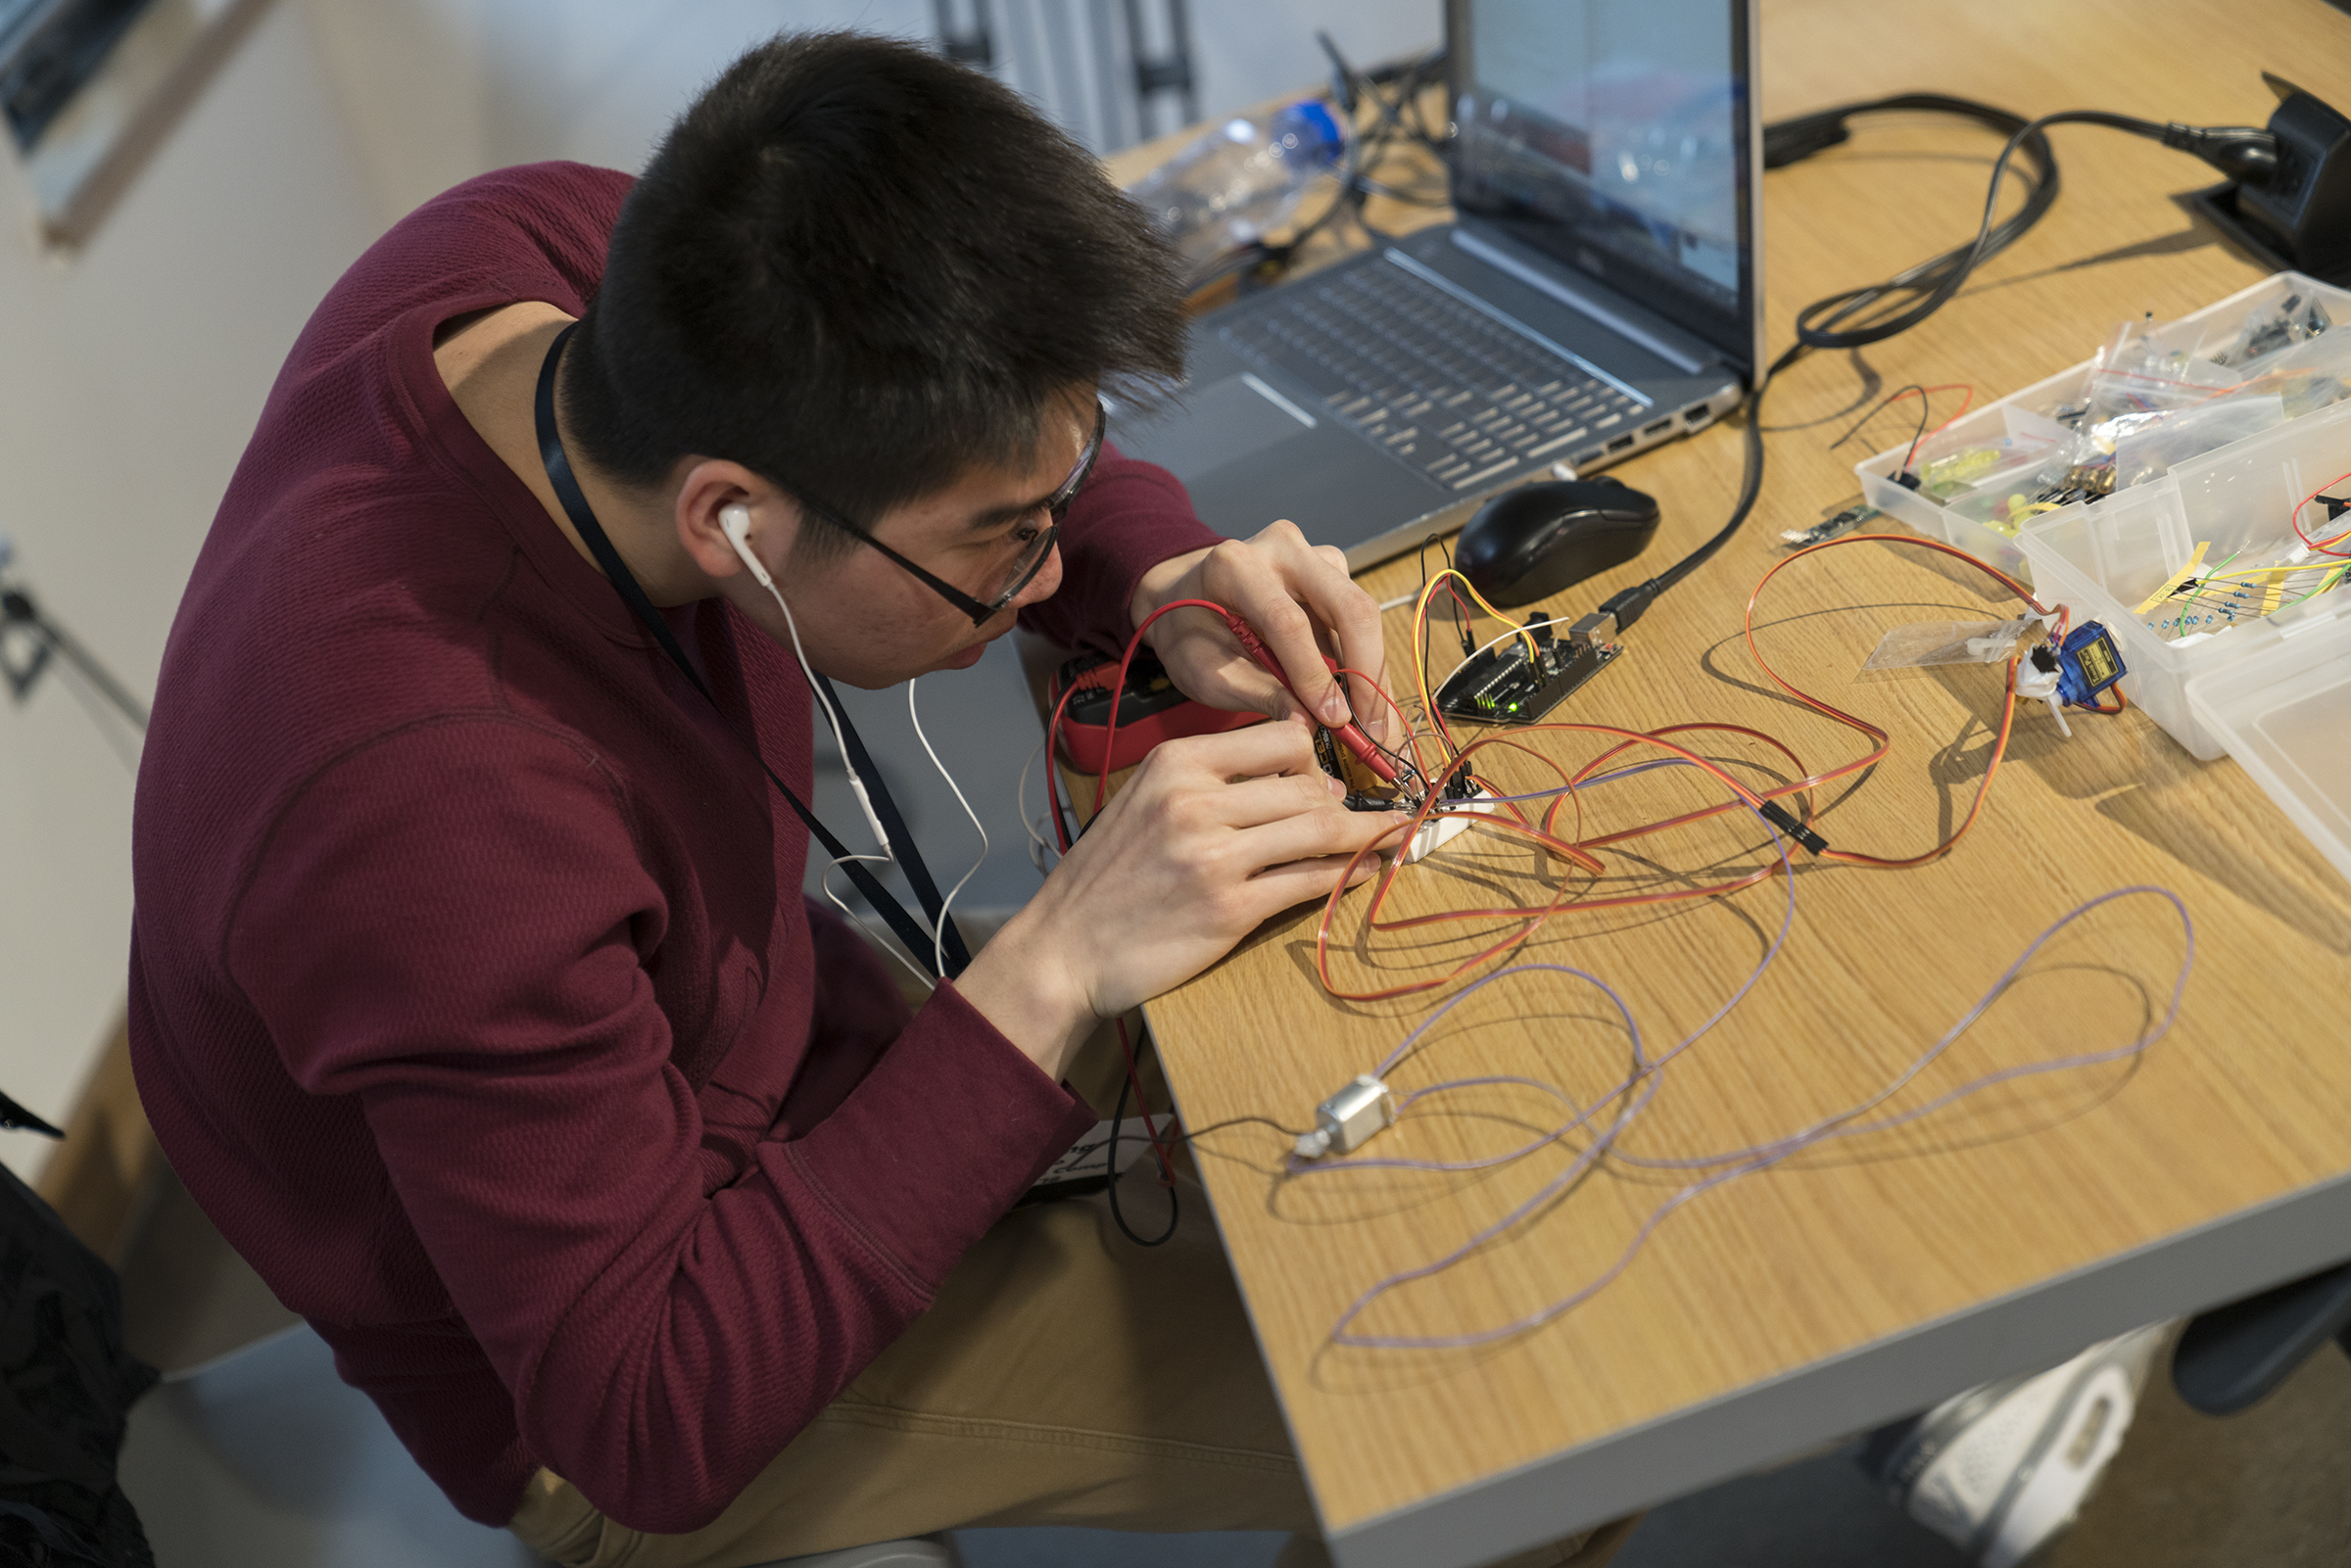 A student creating a prototype at the hackathon